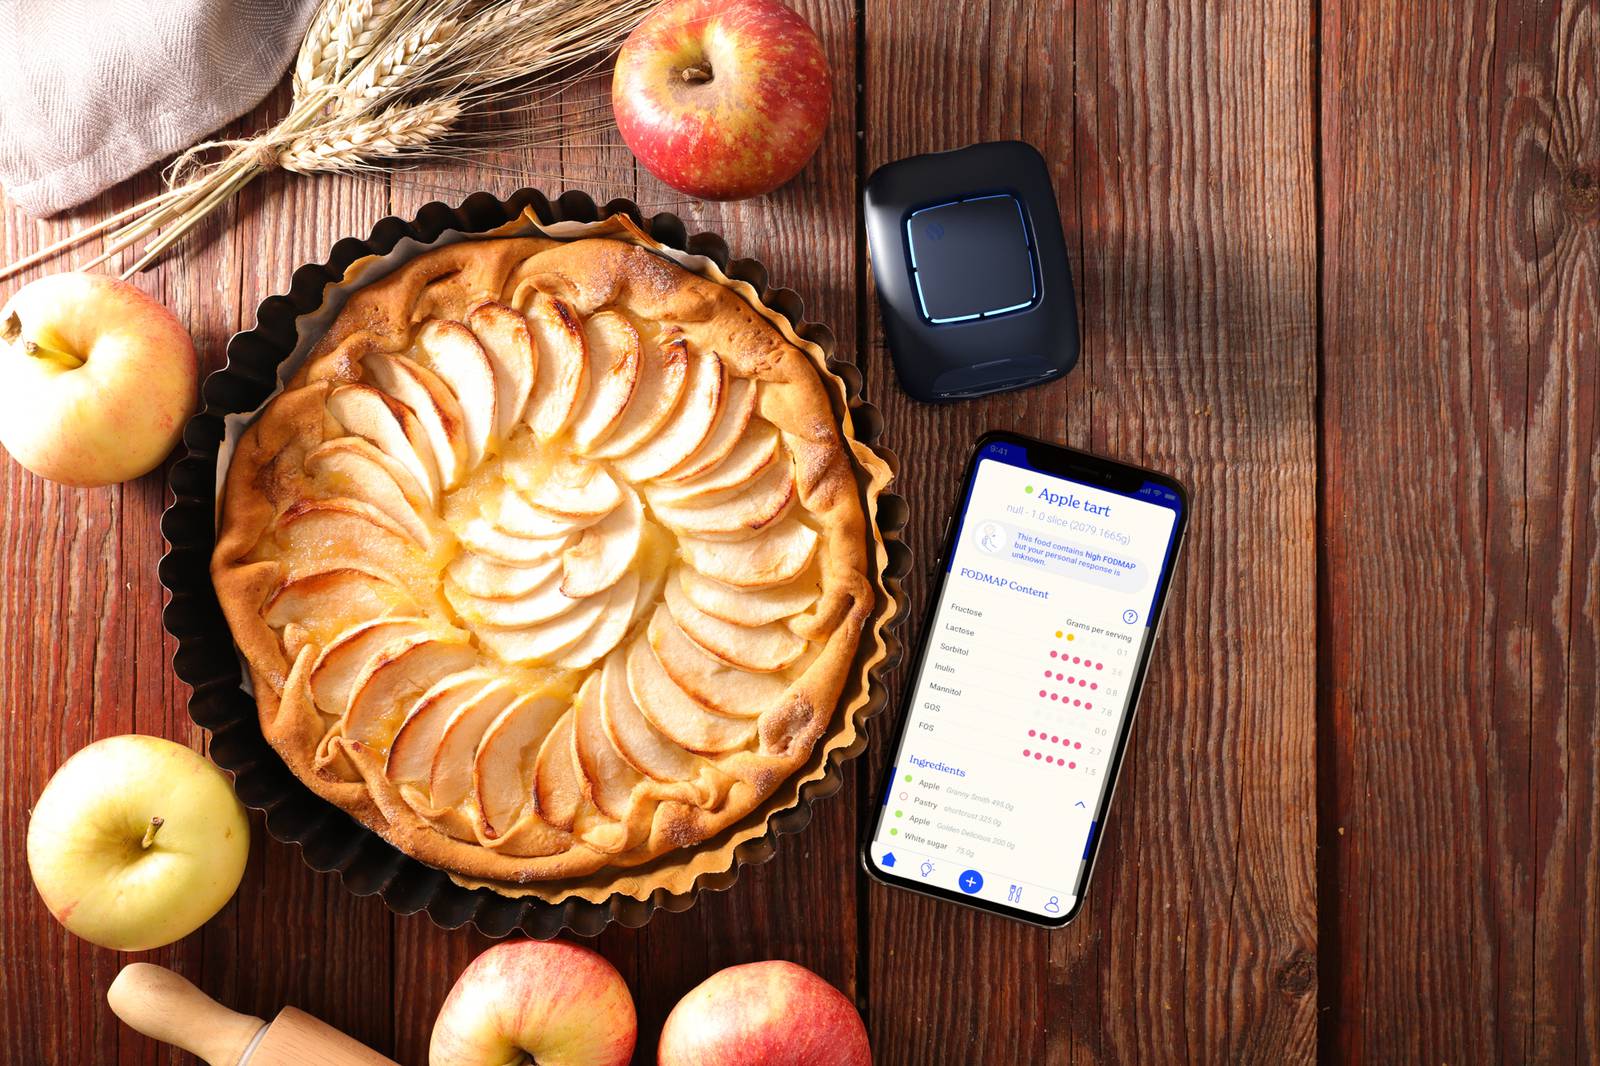 The FoodMarble Aire 2 device pictured alongside the FoodMarble app and an apple pie